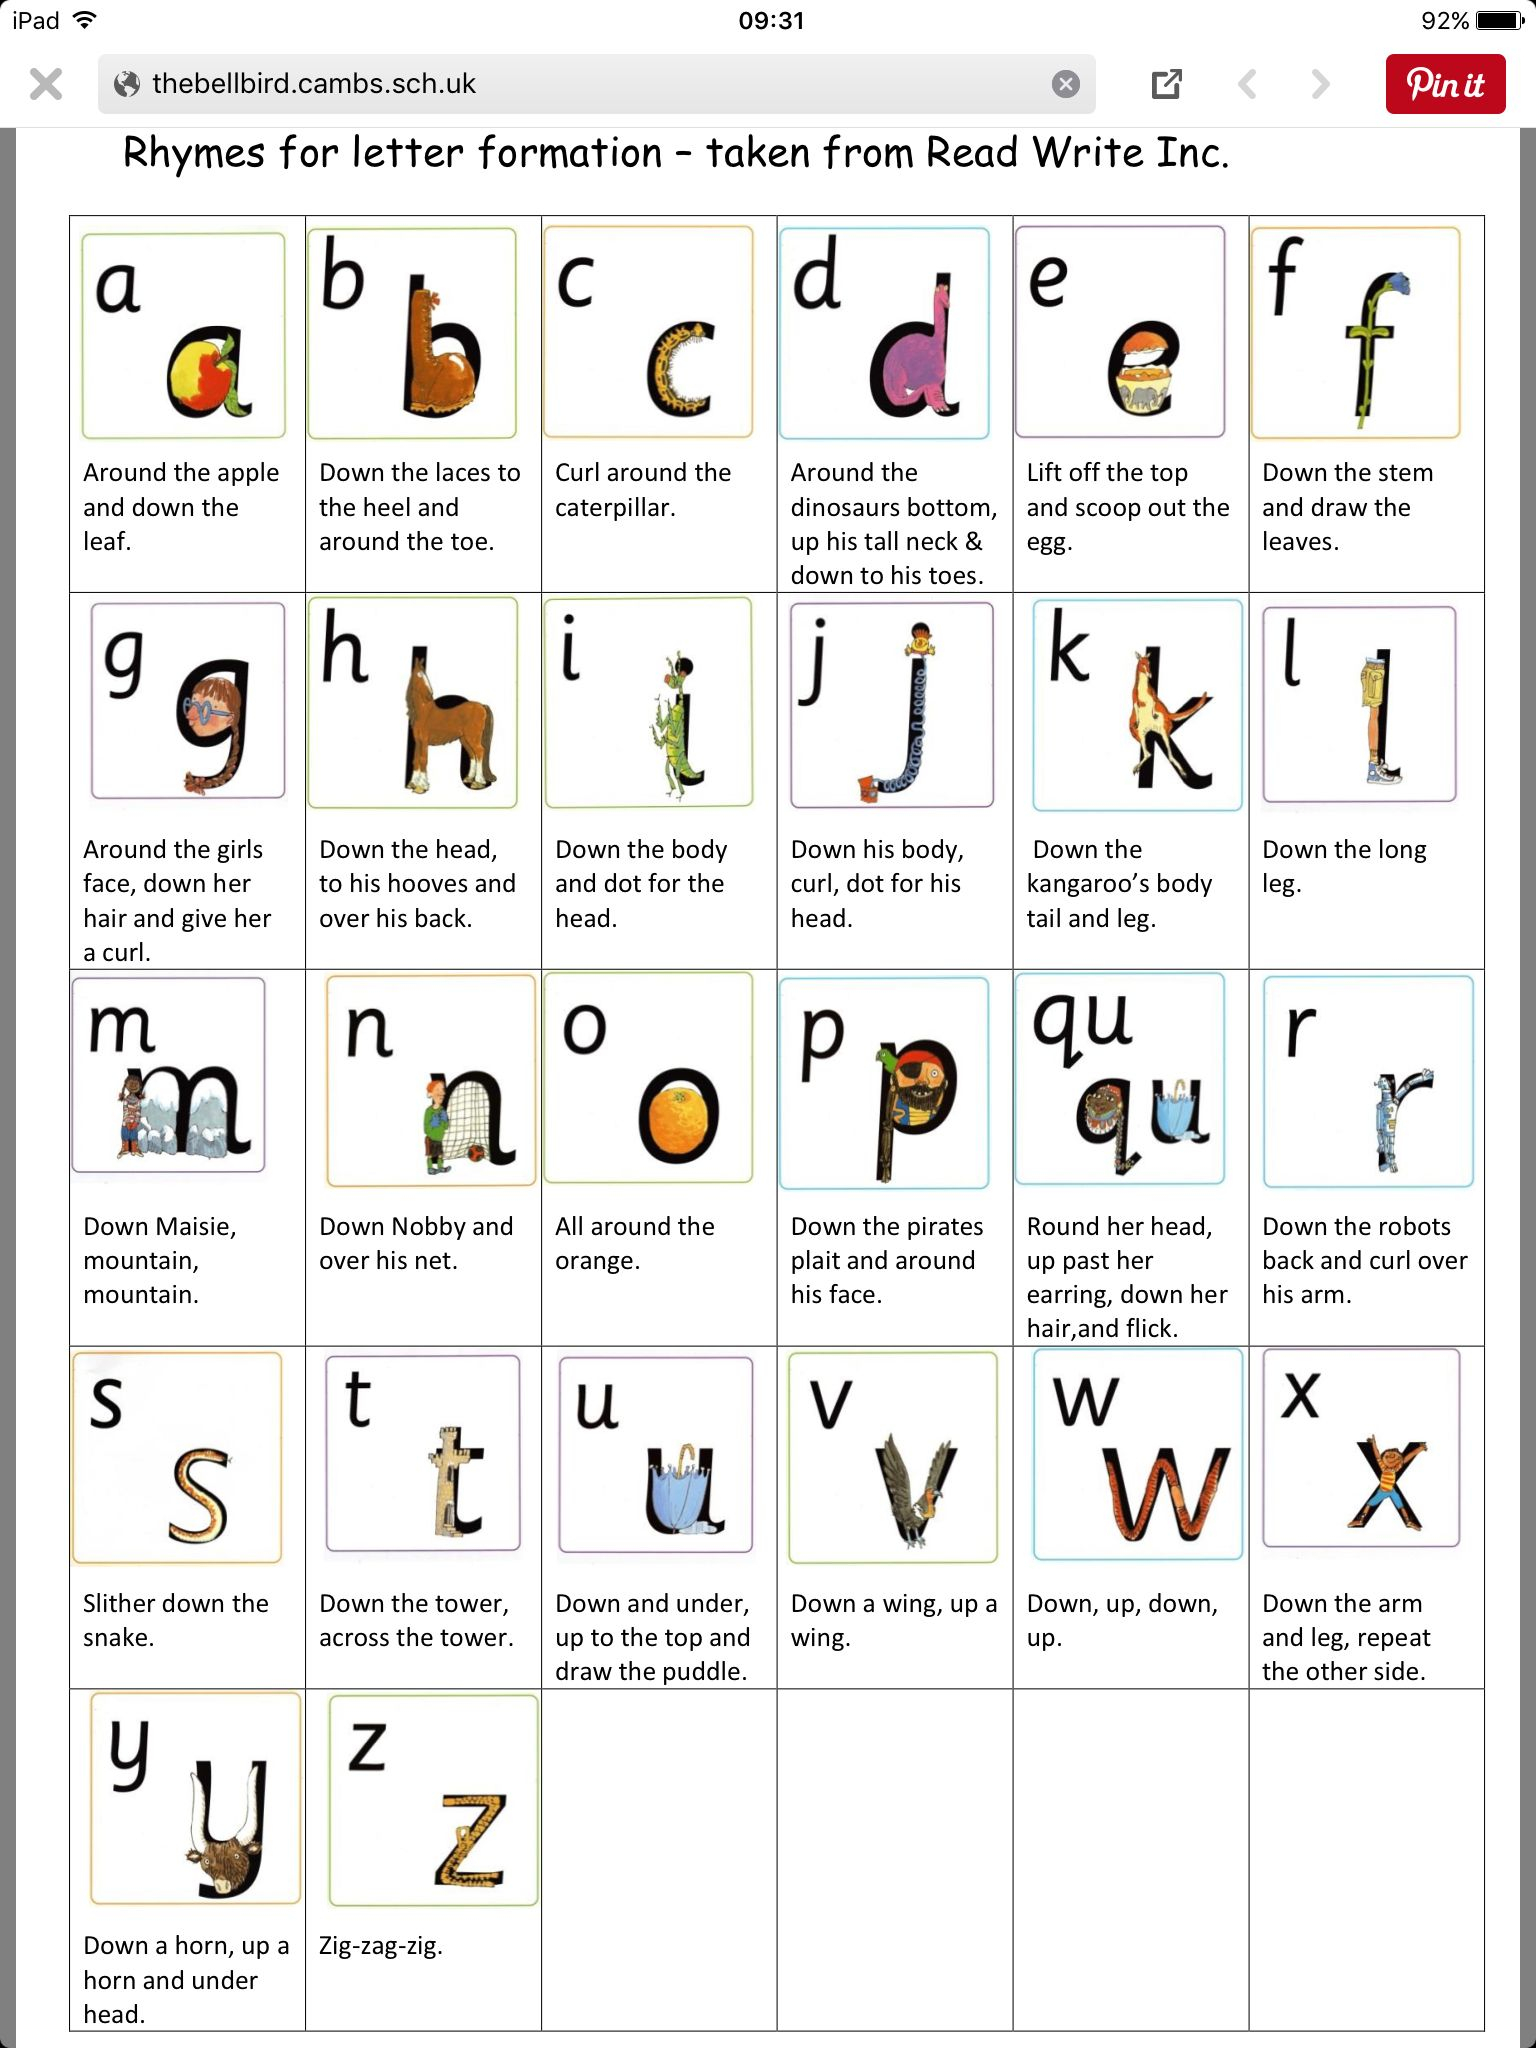 Rhymes For Letter Formation From RWI Read Write Inc 